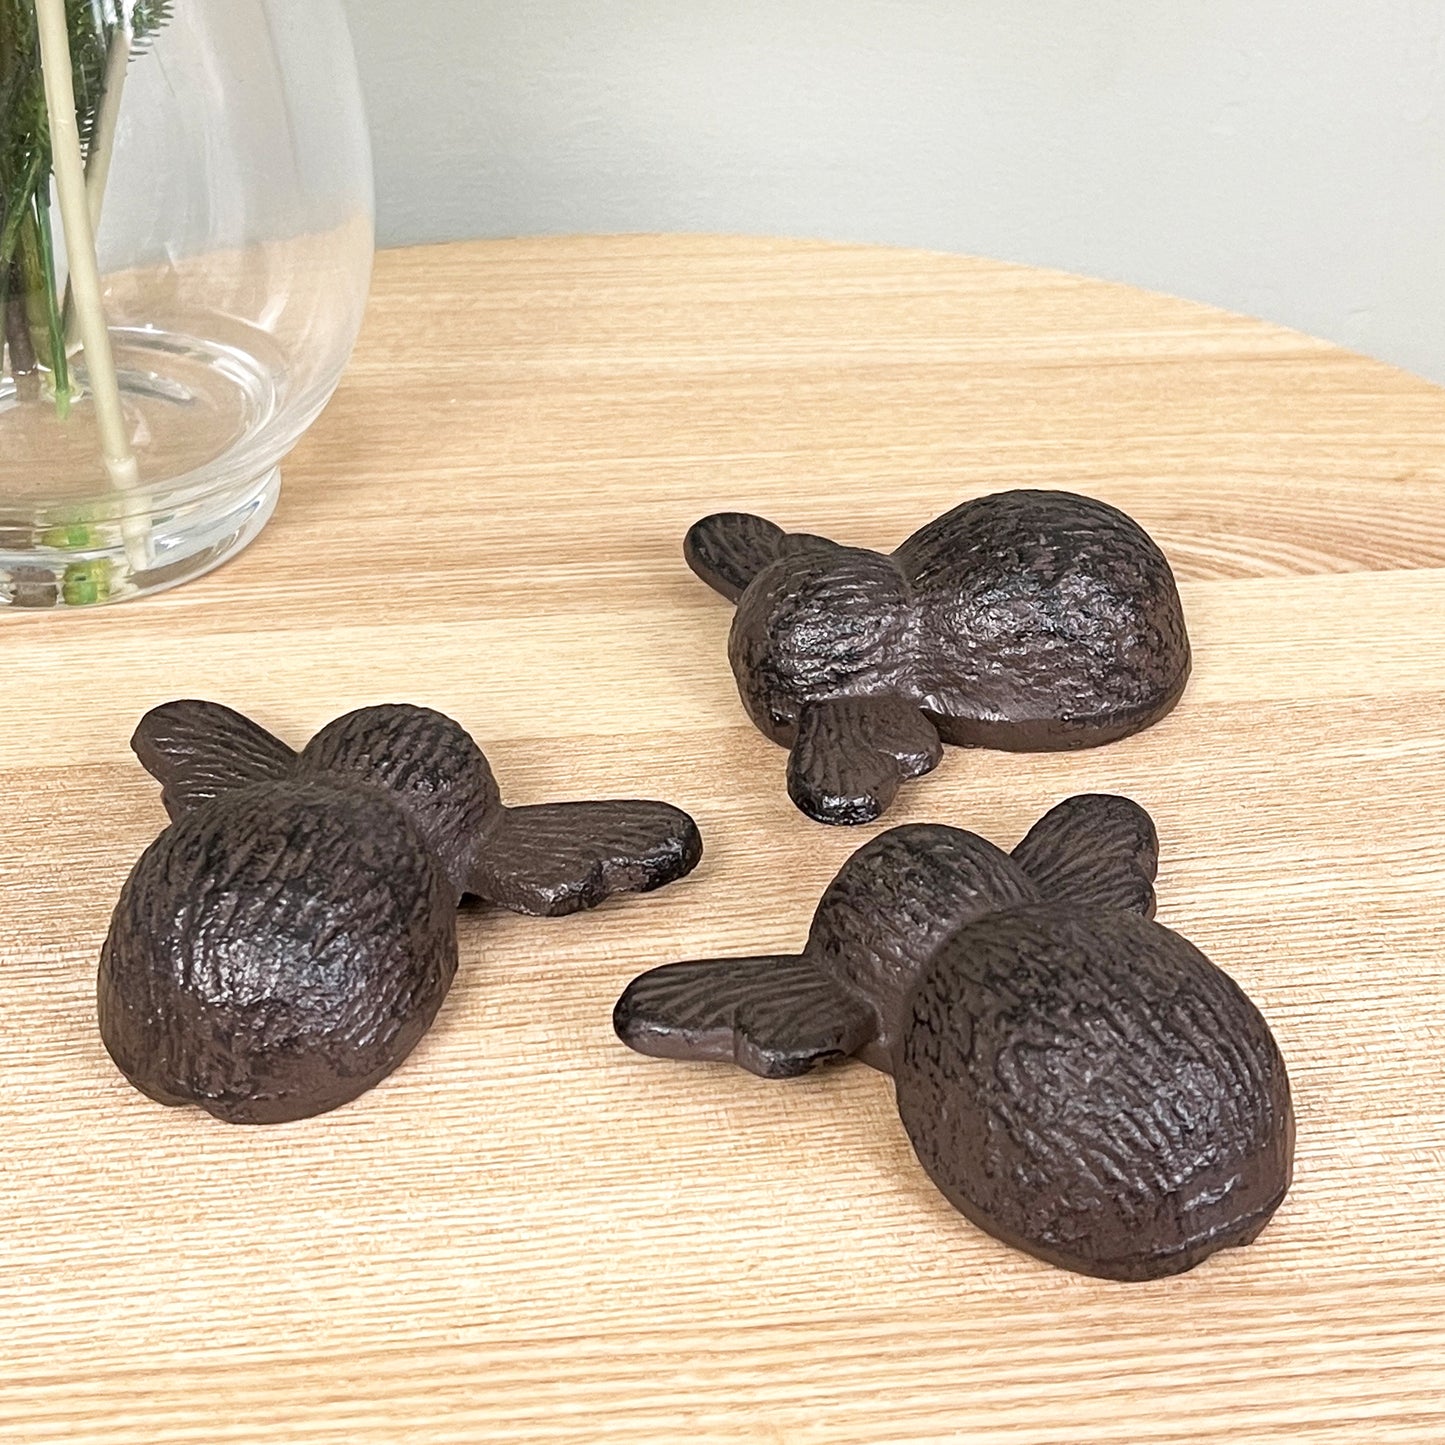 Set of 3 Cast Iron Bees Decorations